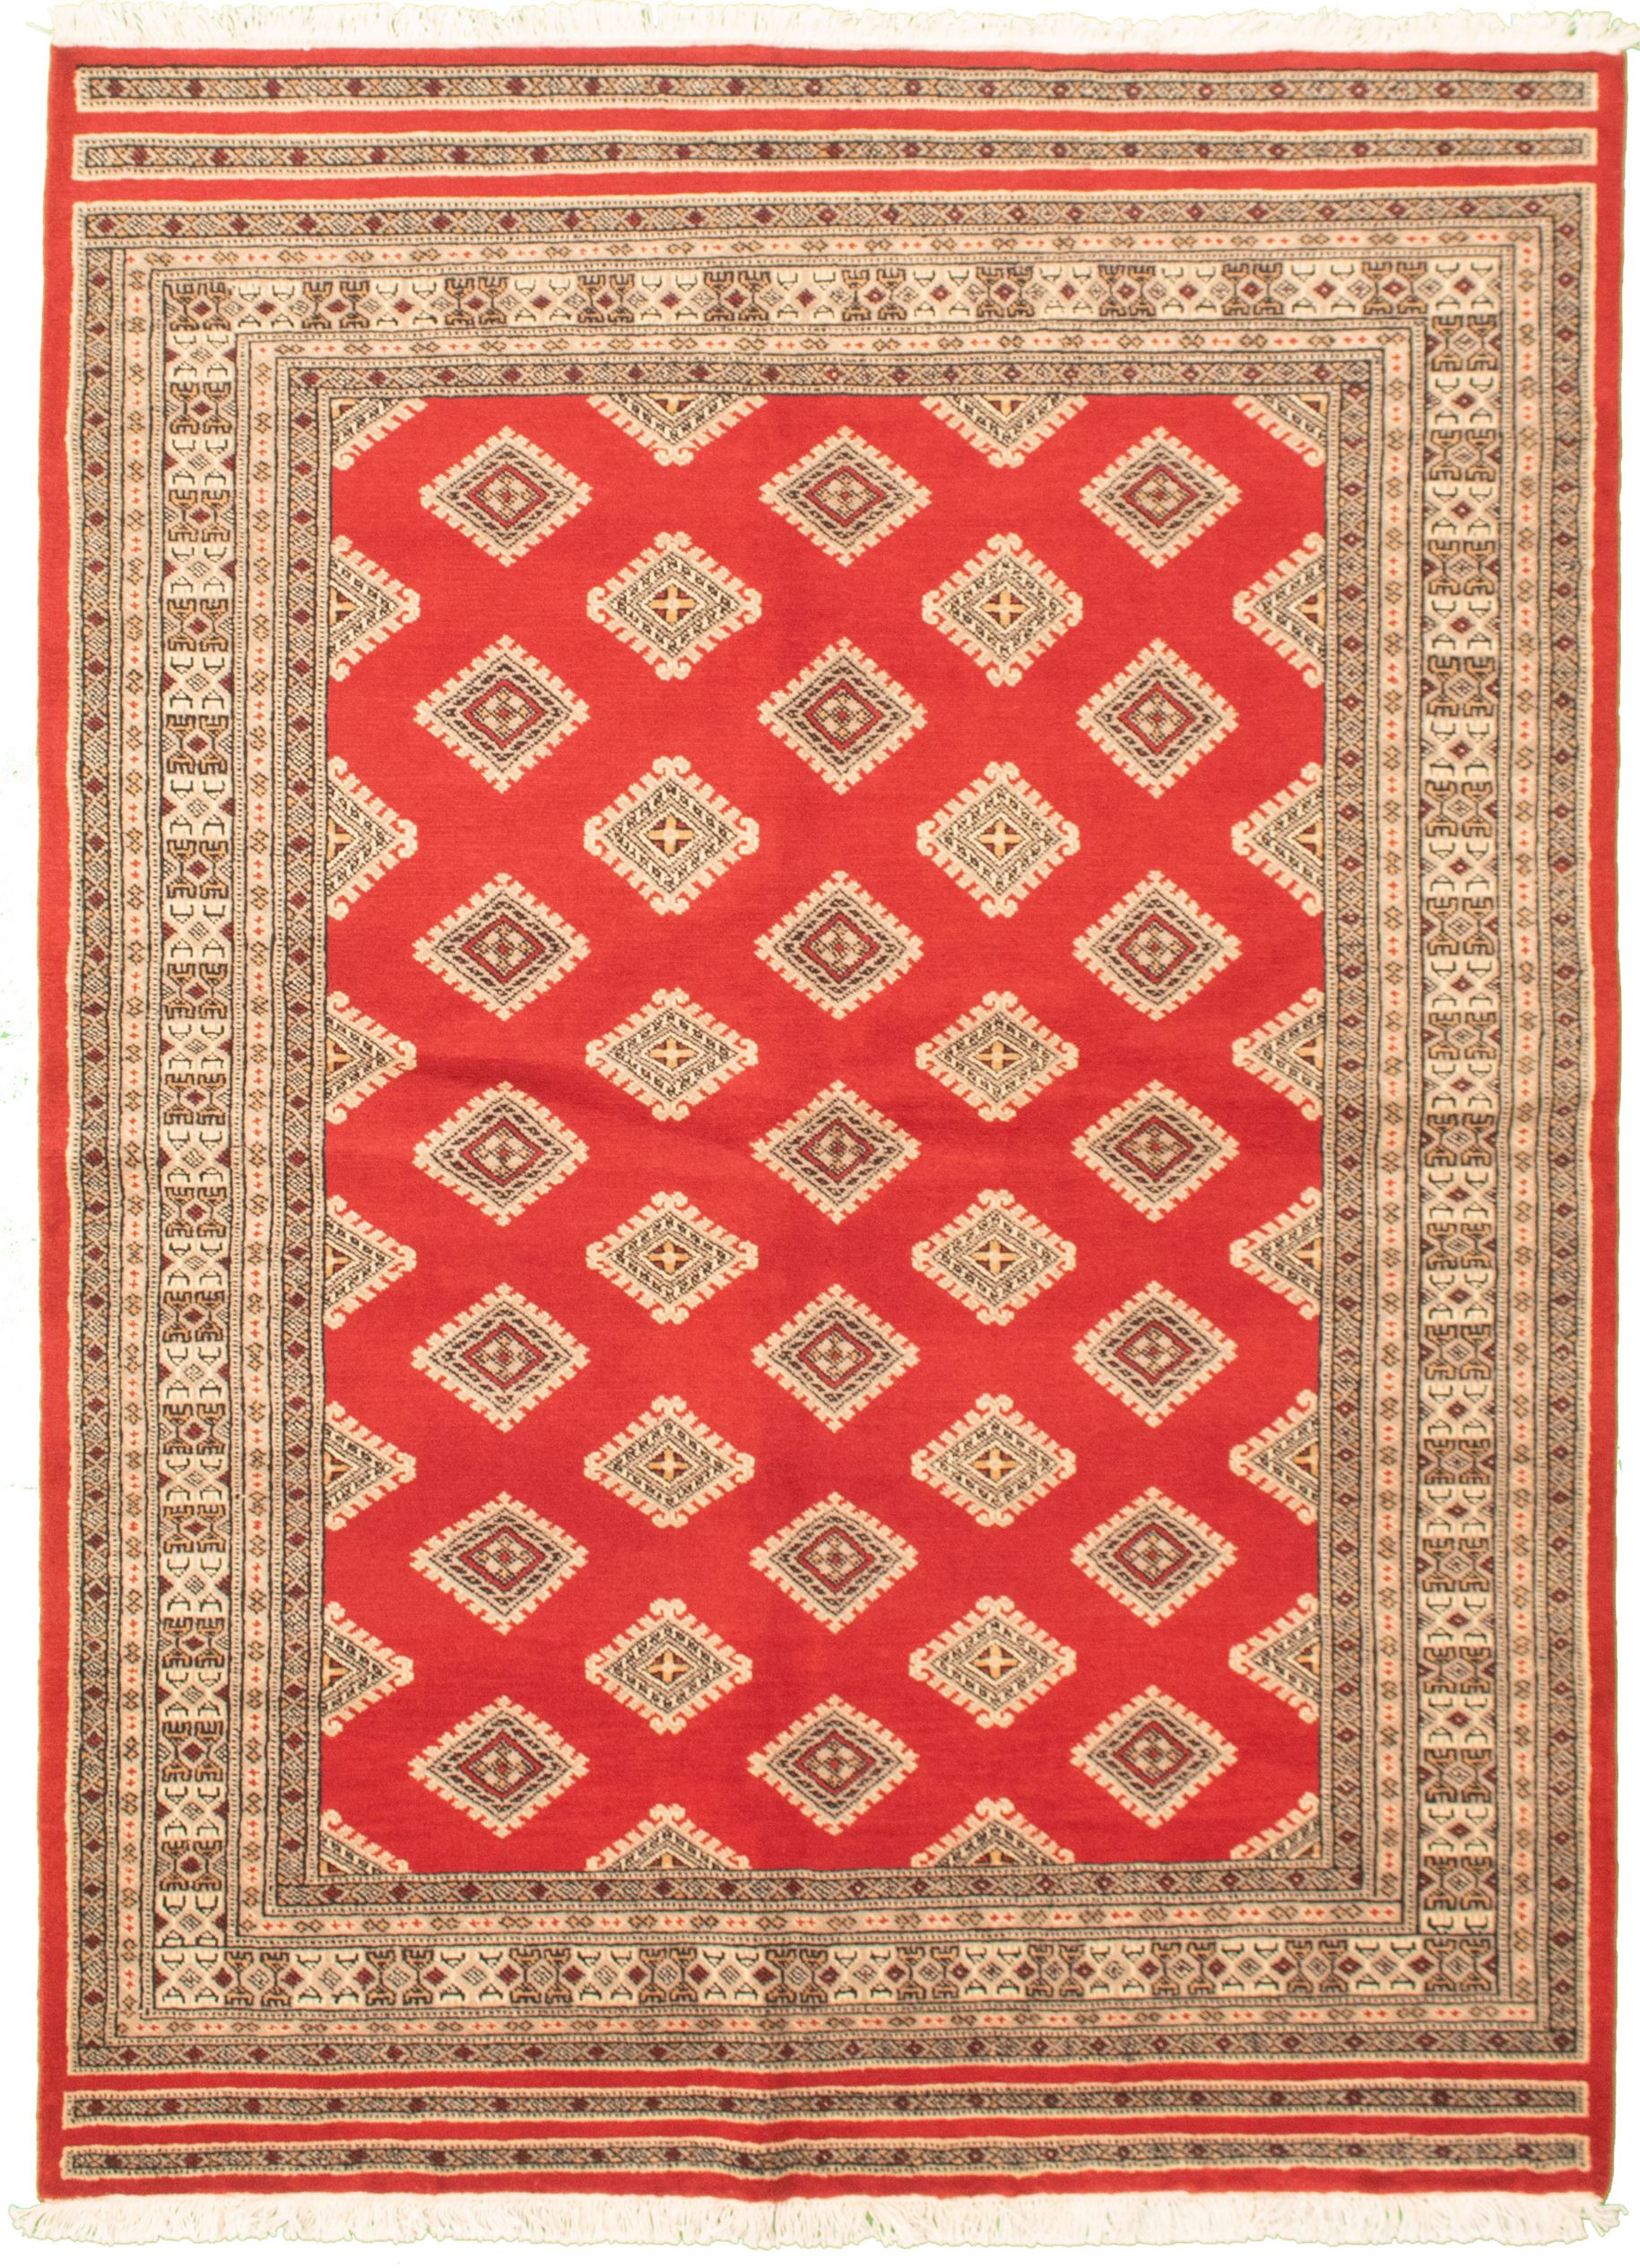 Hand-knotted Finest Peshawar Bokhara Red Wool Rug 5'7" x 8'0"  Size: 5'7" x 8'0"  